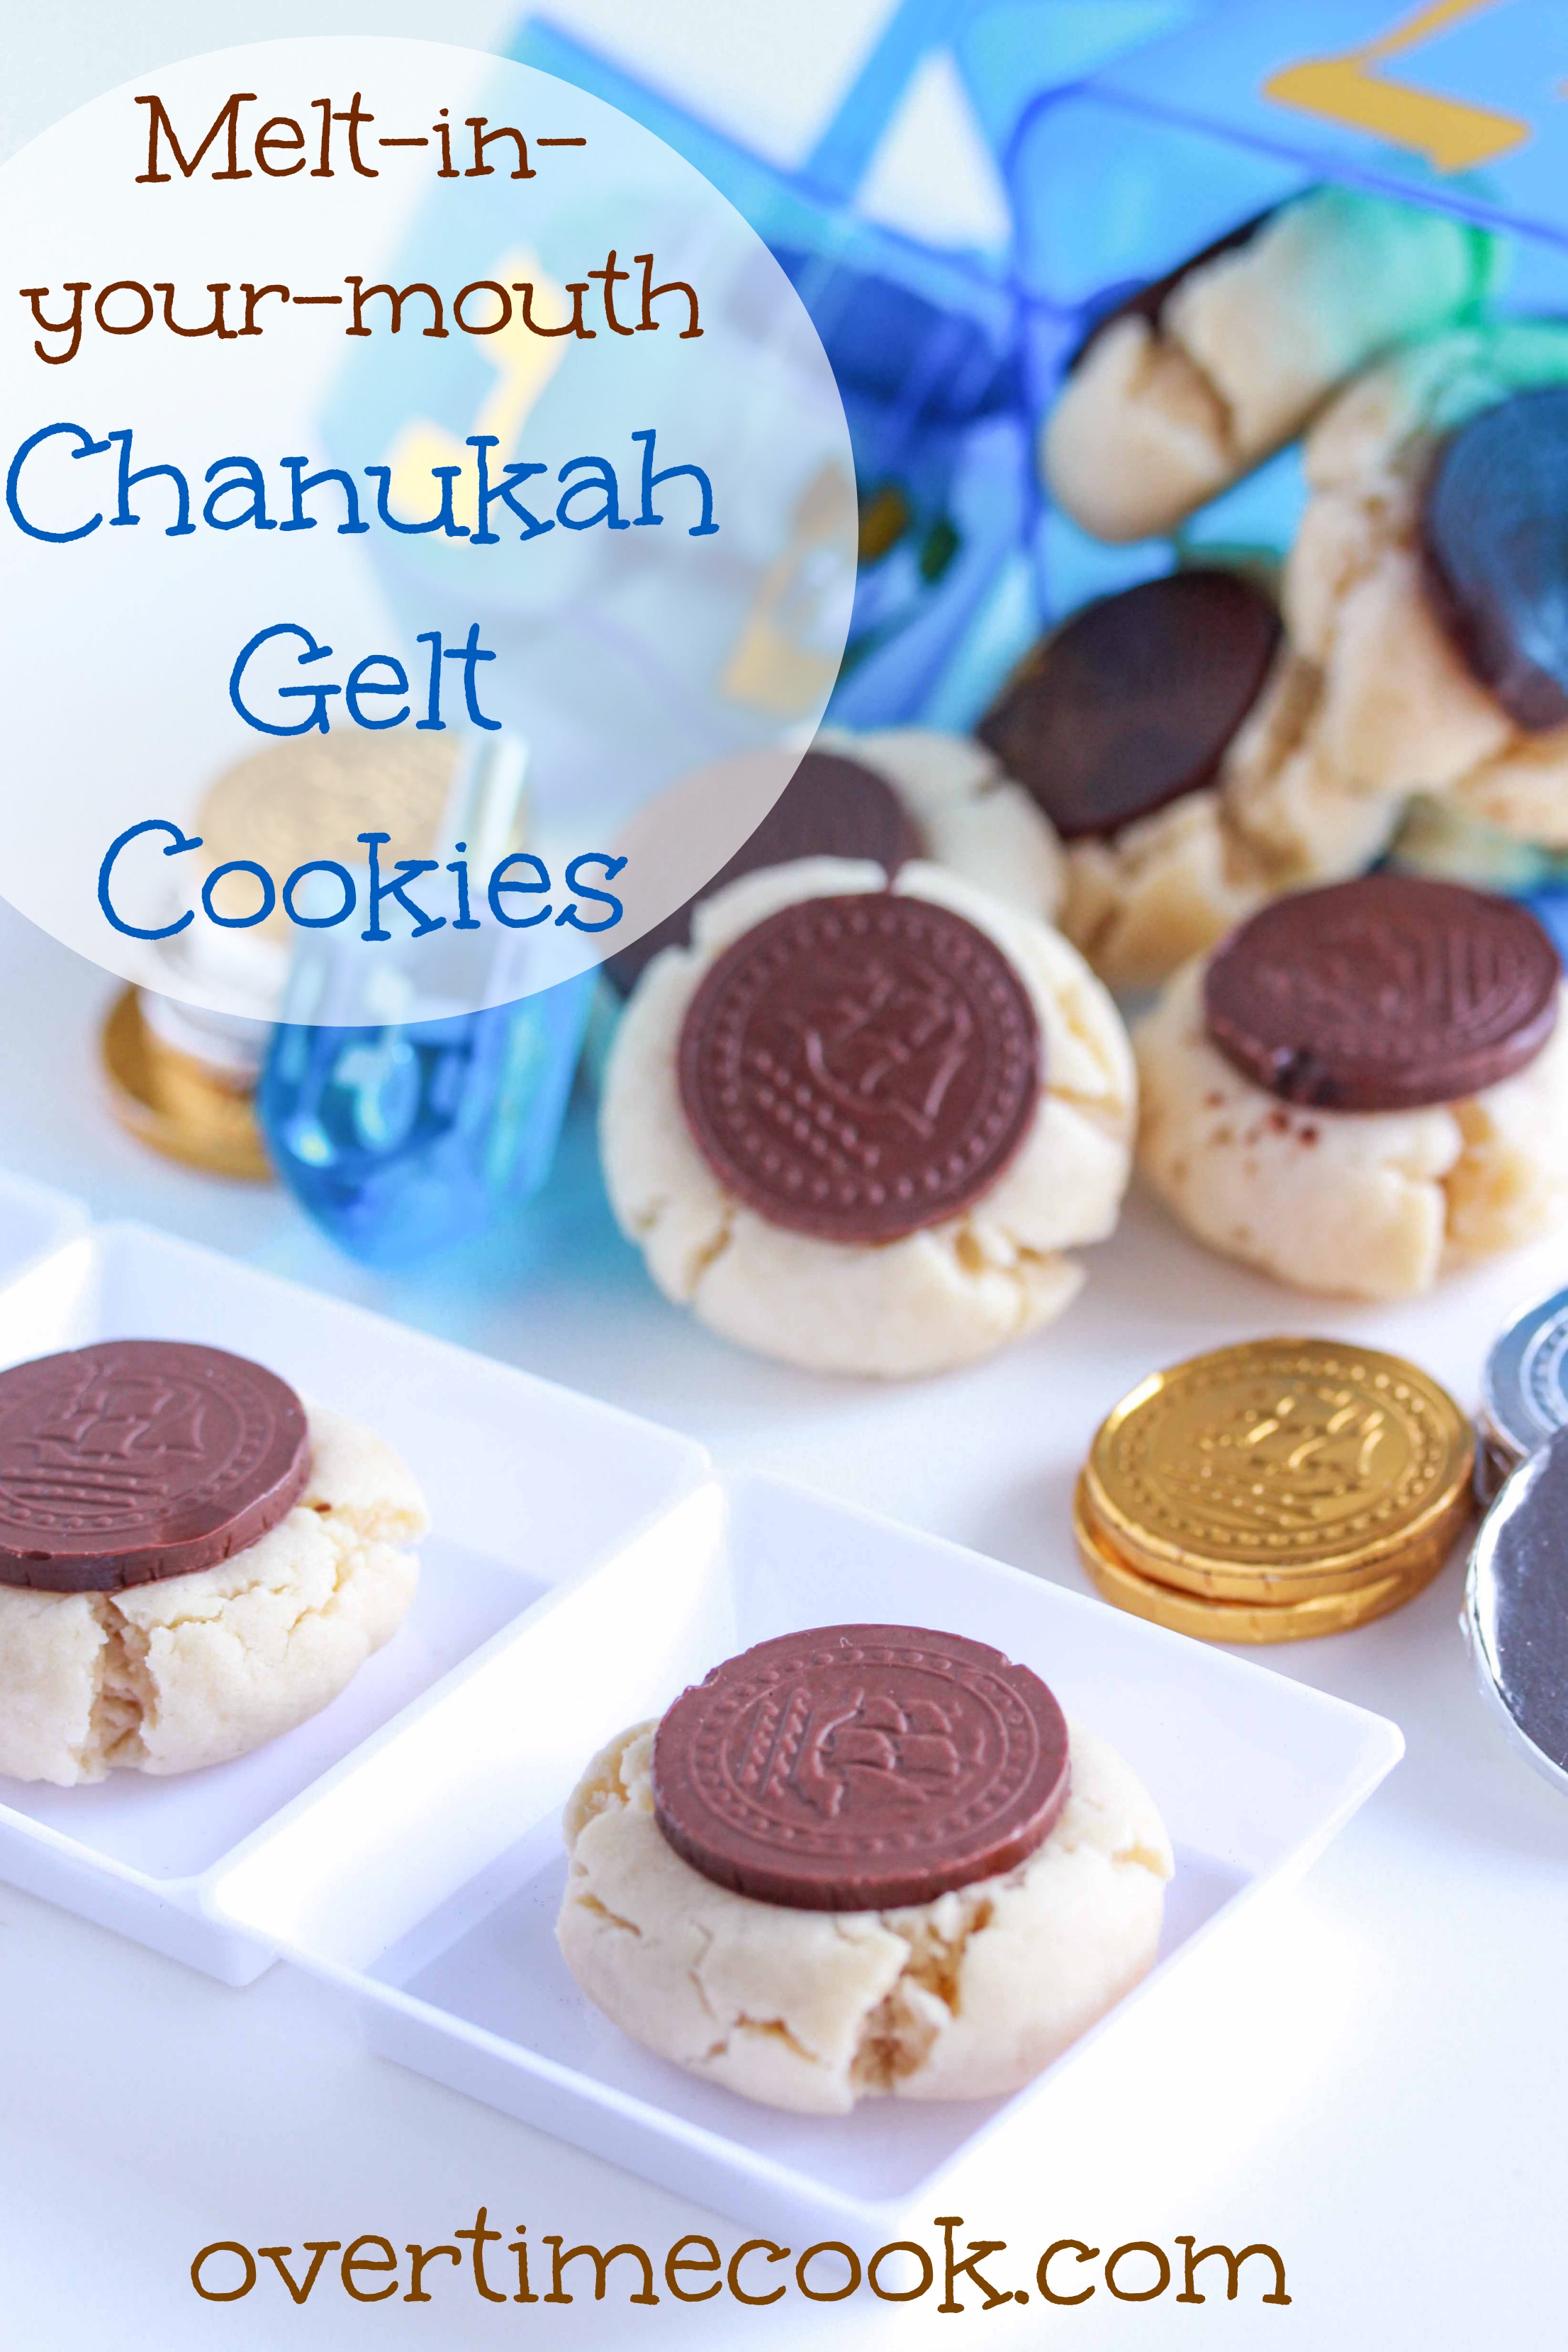 chanuka gelt cookies on OvertimeCook - these melt in your mouth!